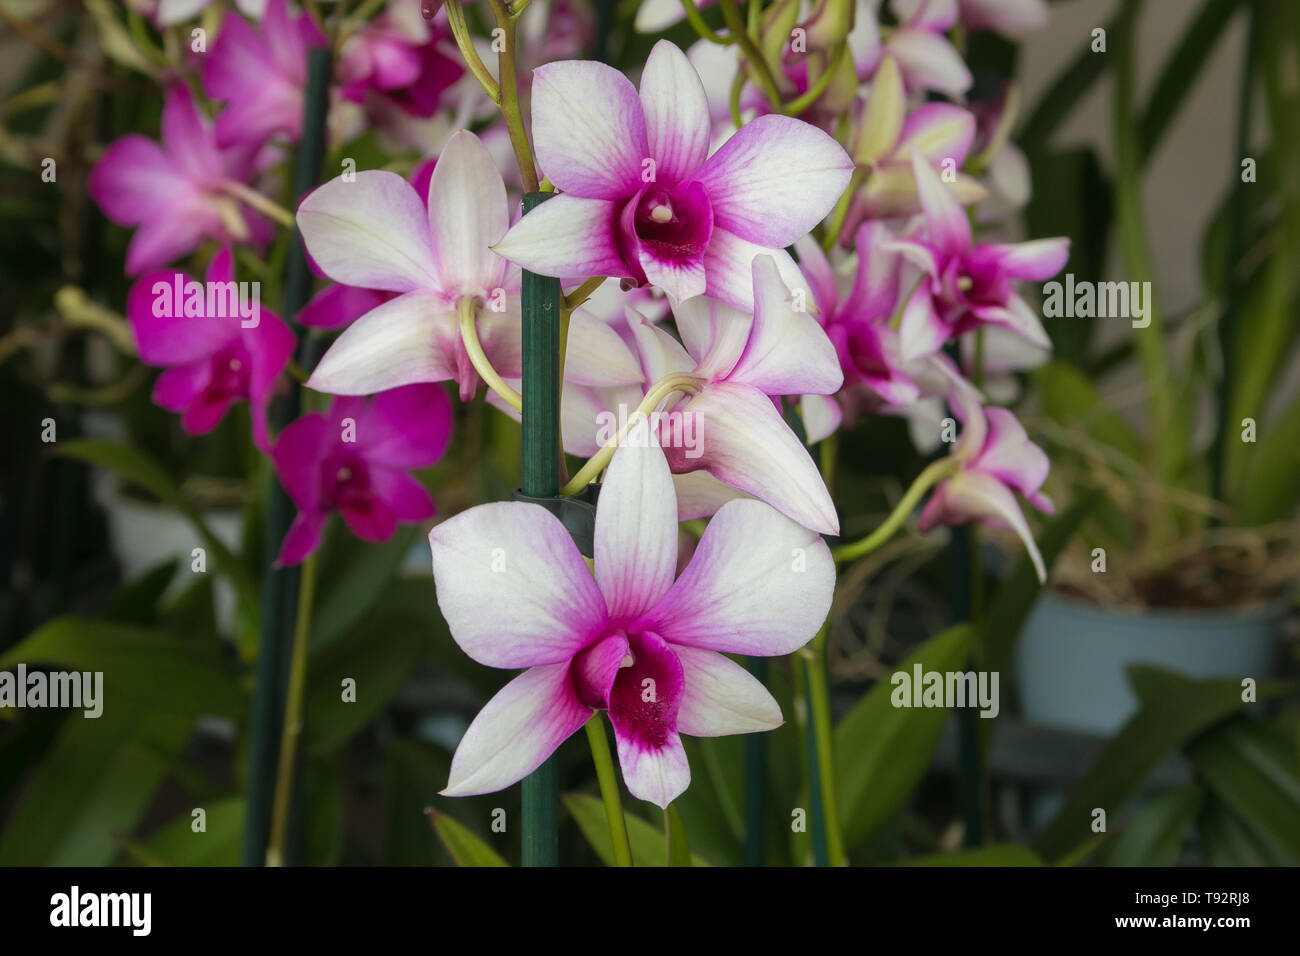 Orchid flower for postcard beauty and agriculture concept design Stock Photo